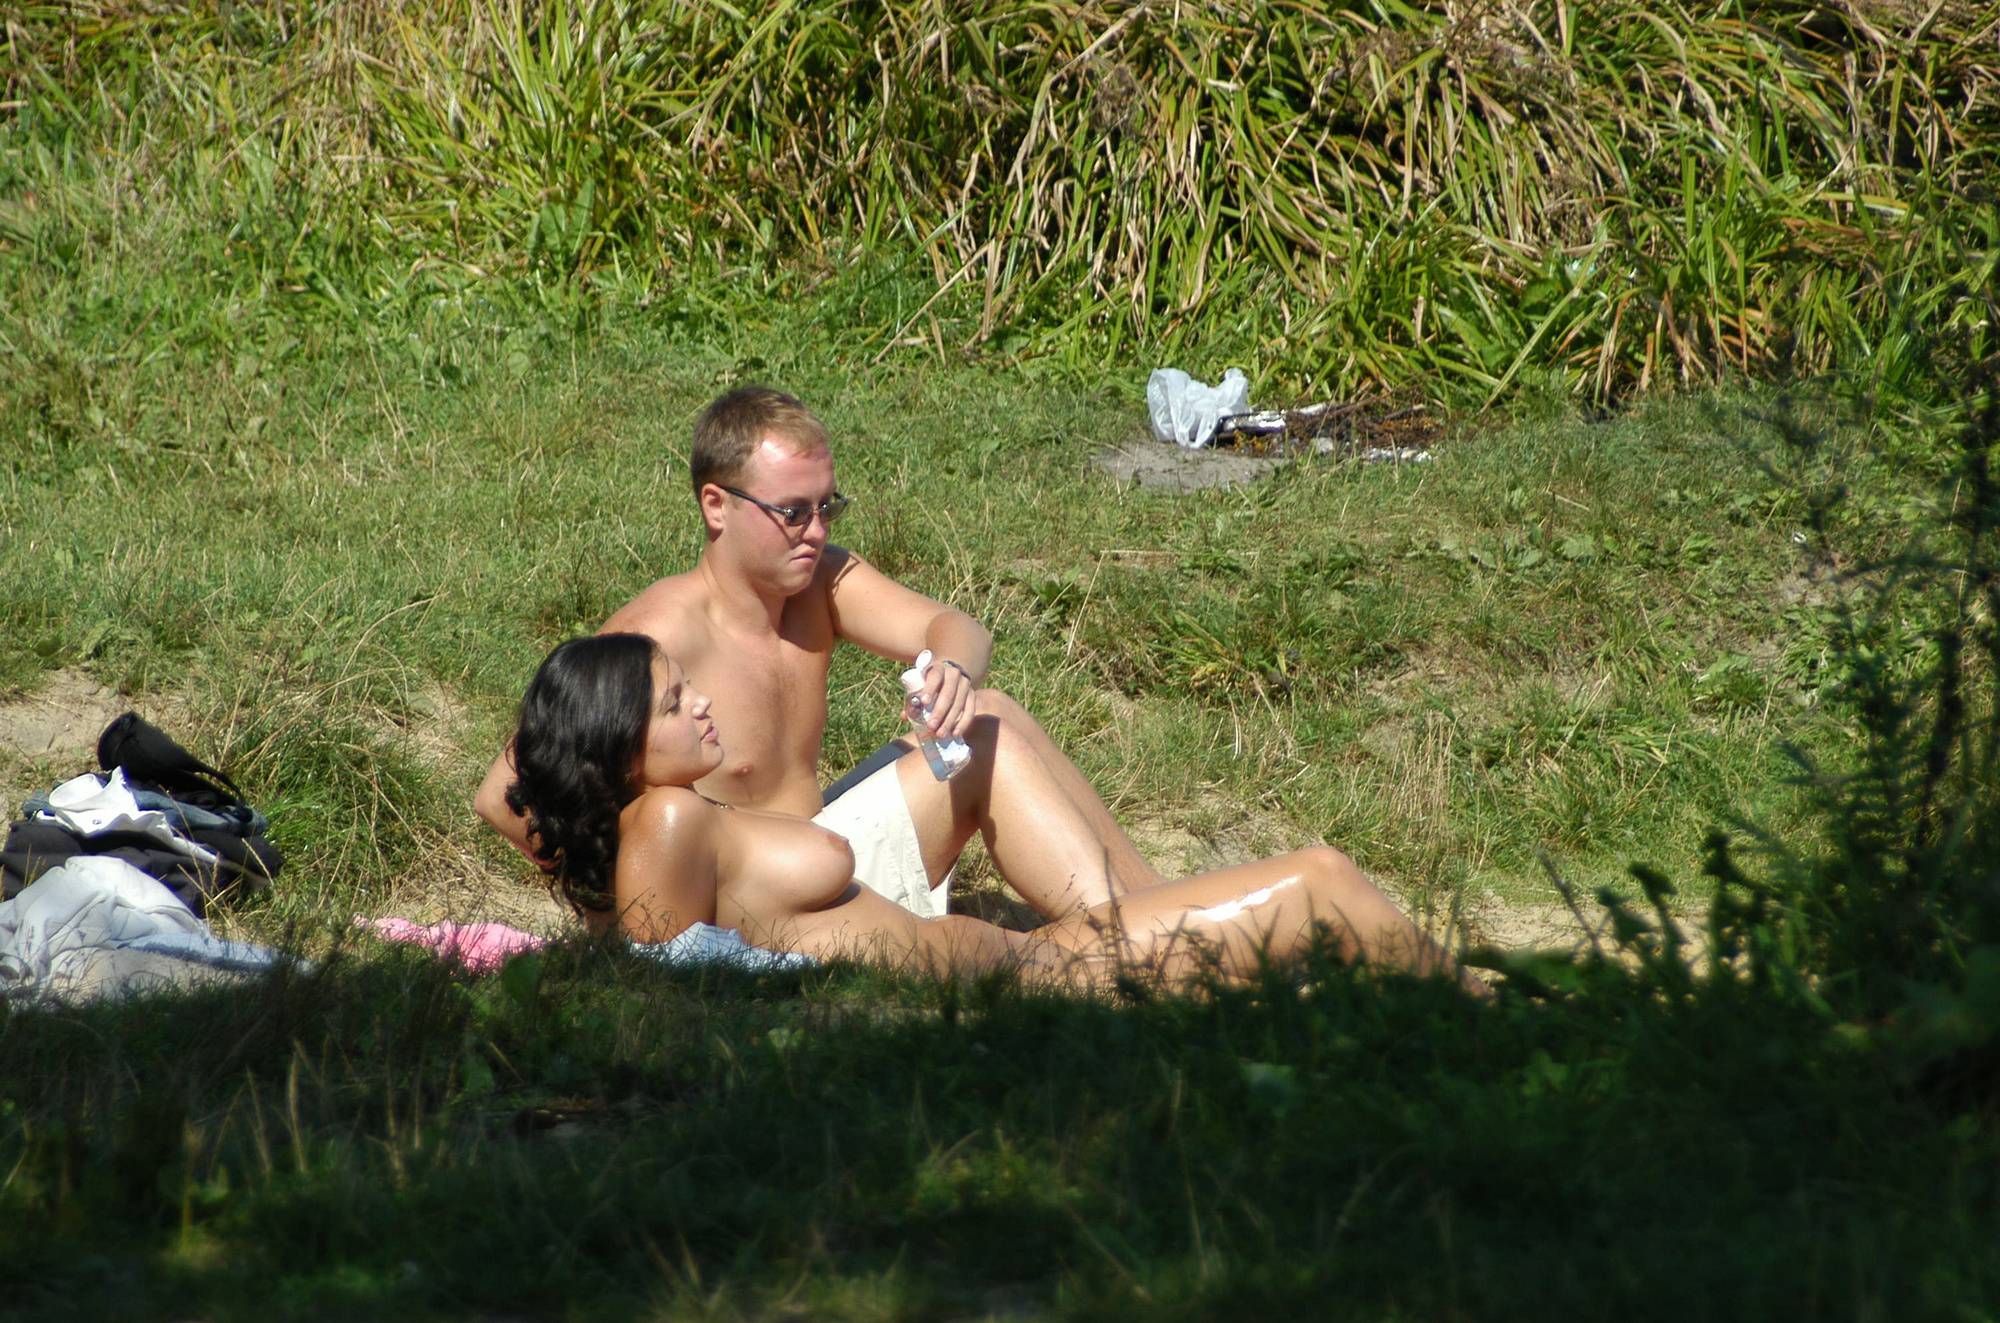 Family Nudism Gallery - Photo Shoot Observation